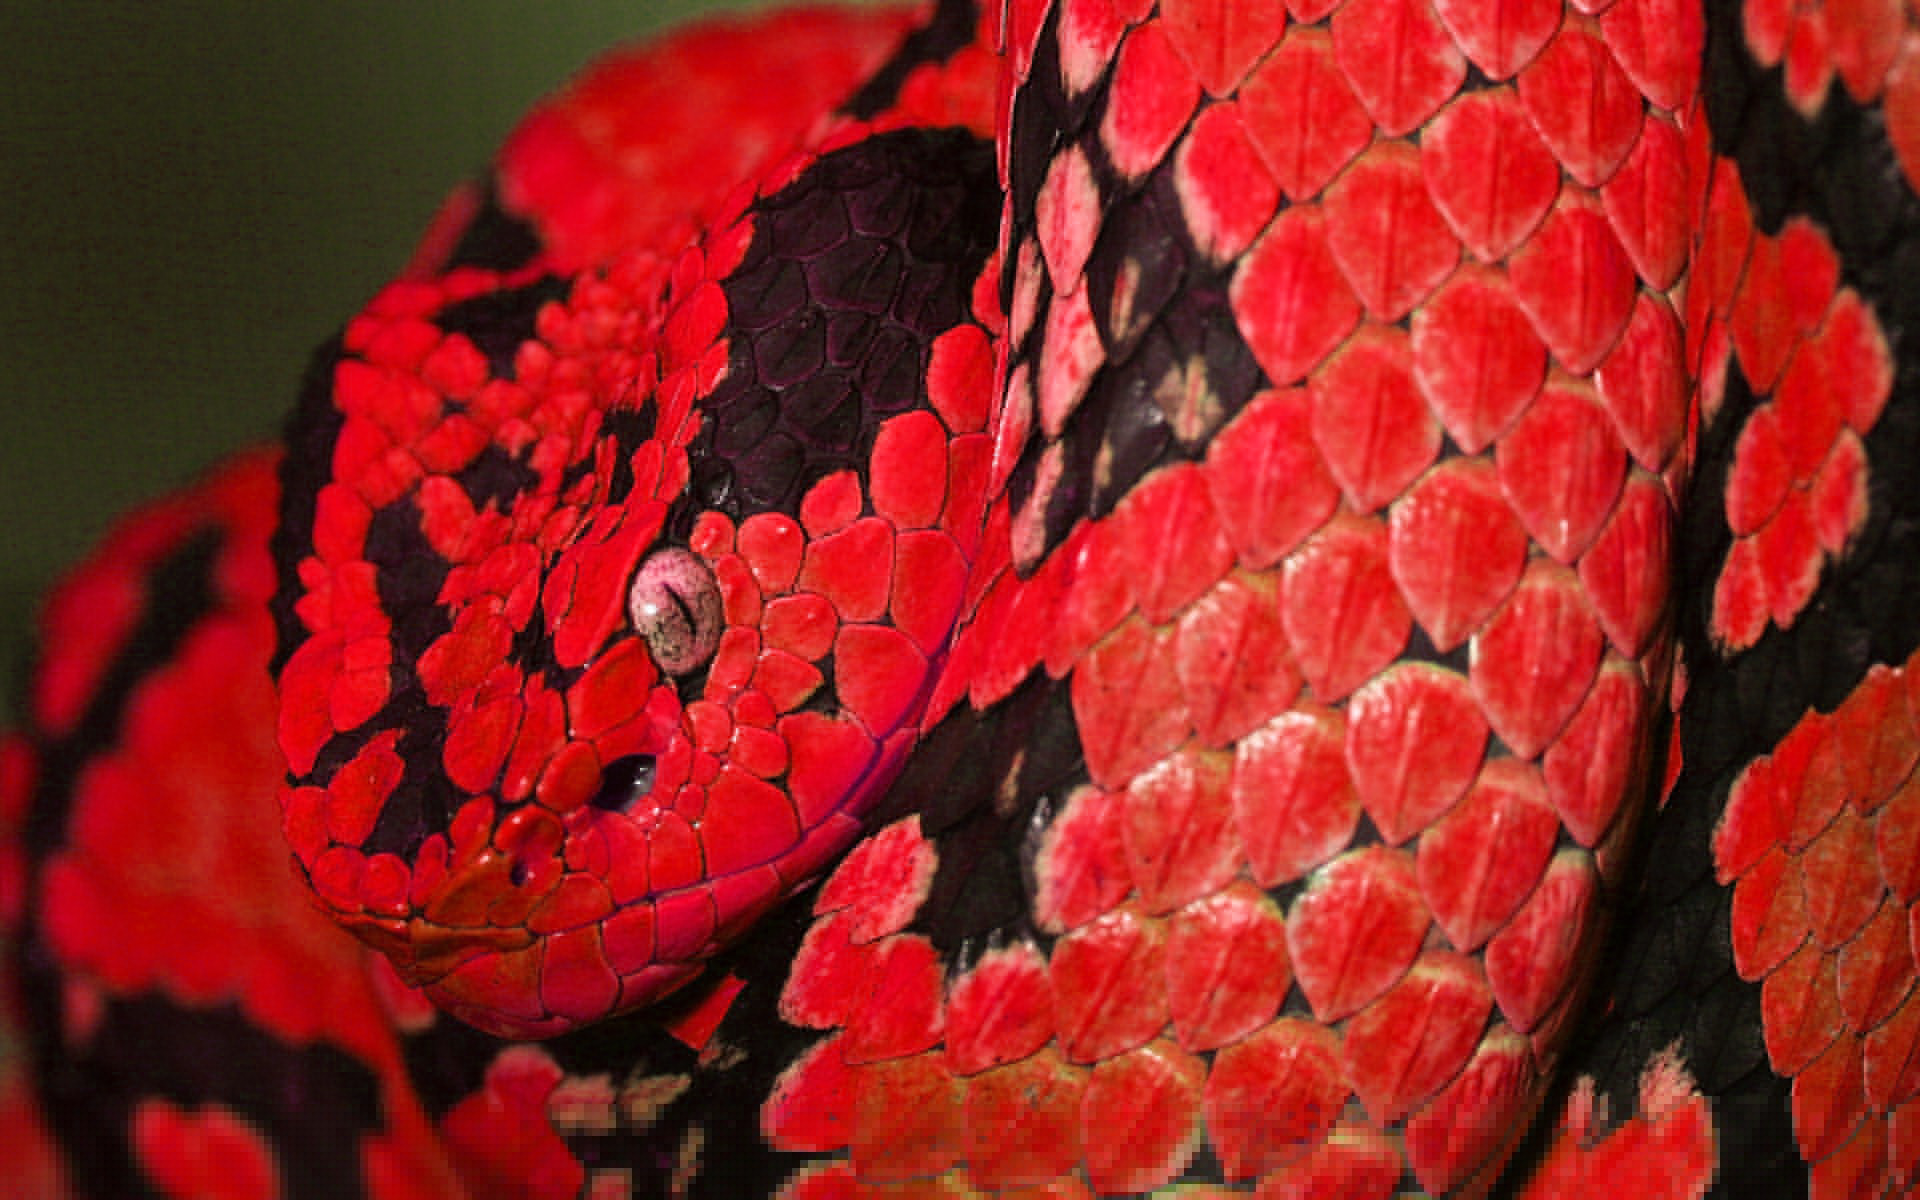 A vibrant snake in the wild, showcasing vibrant colors and patterns.